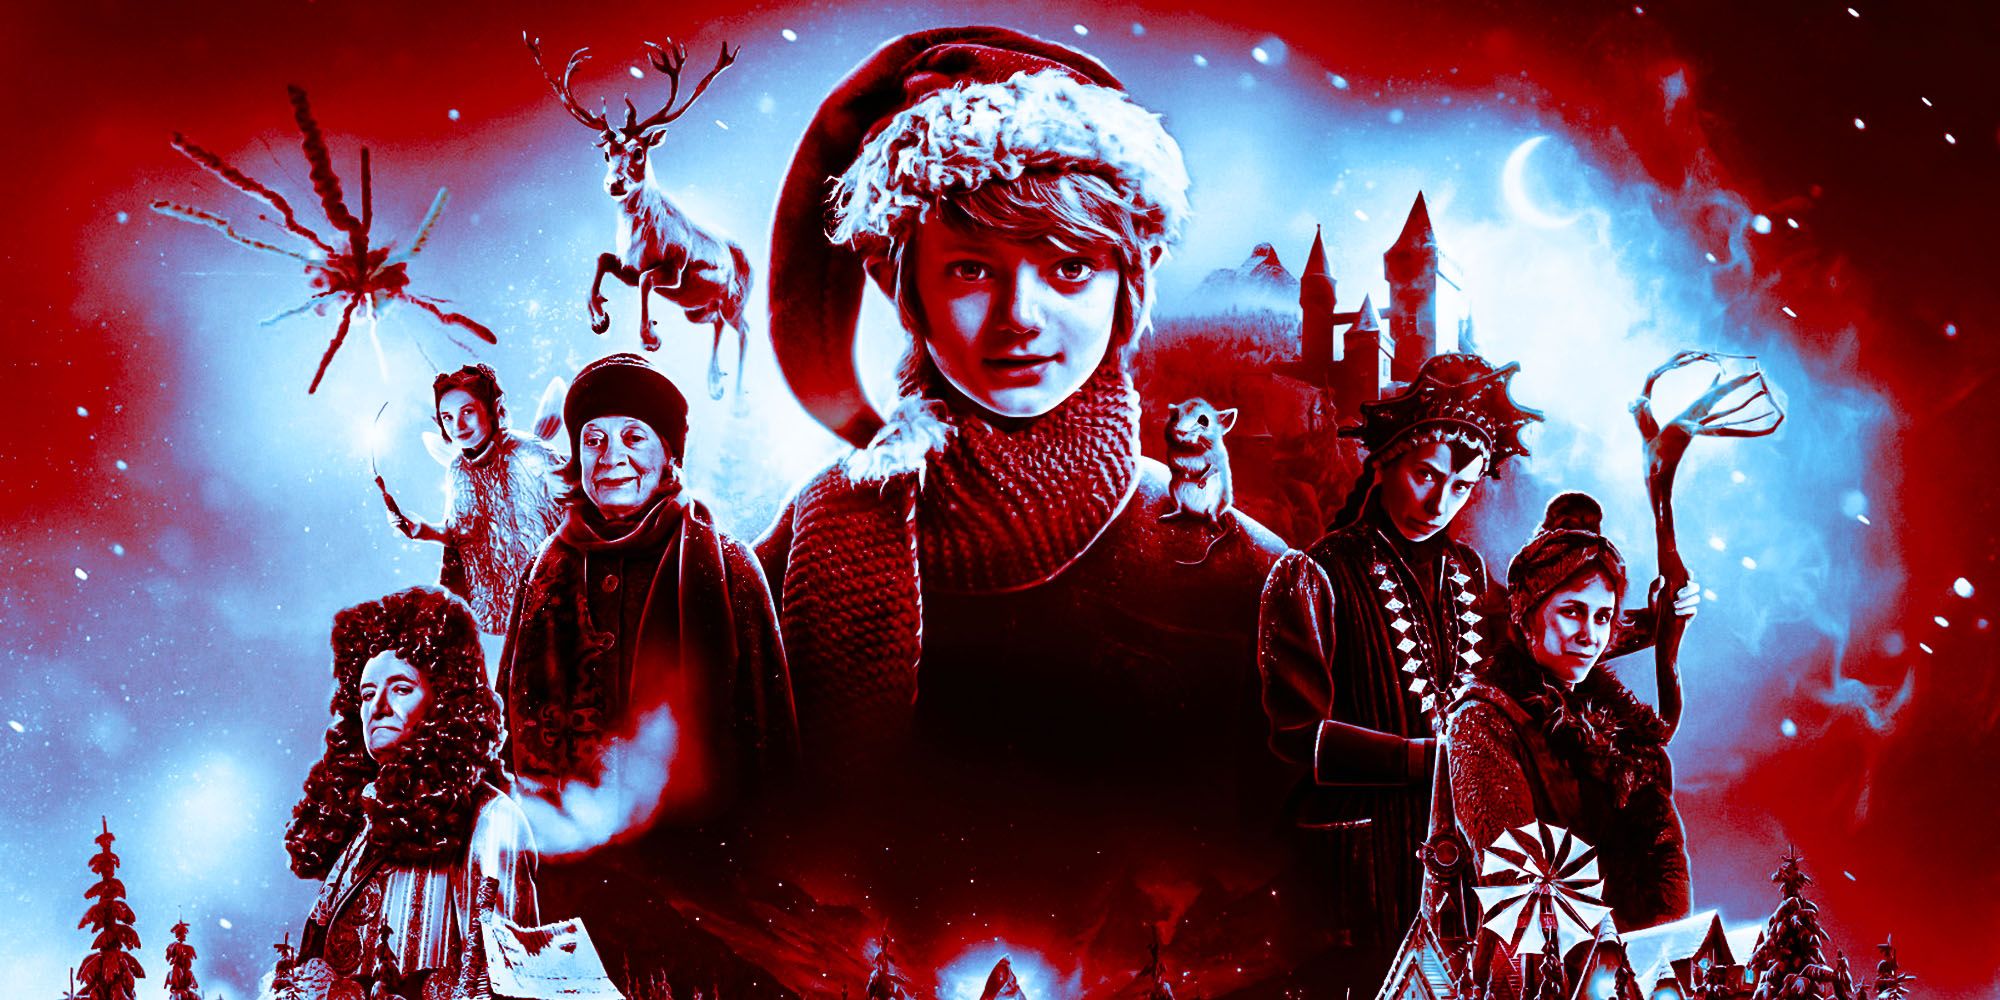 A Boy Called Christmas Cast & Character Guide